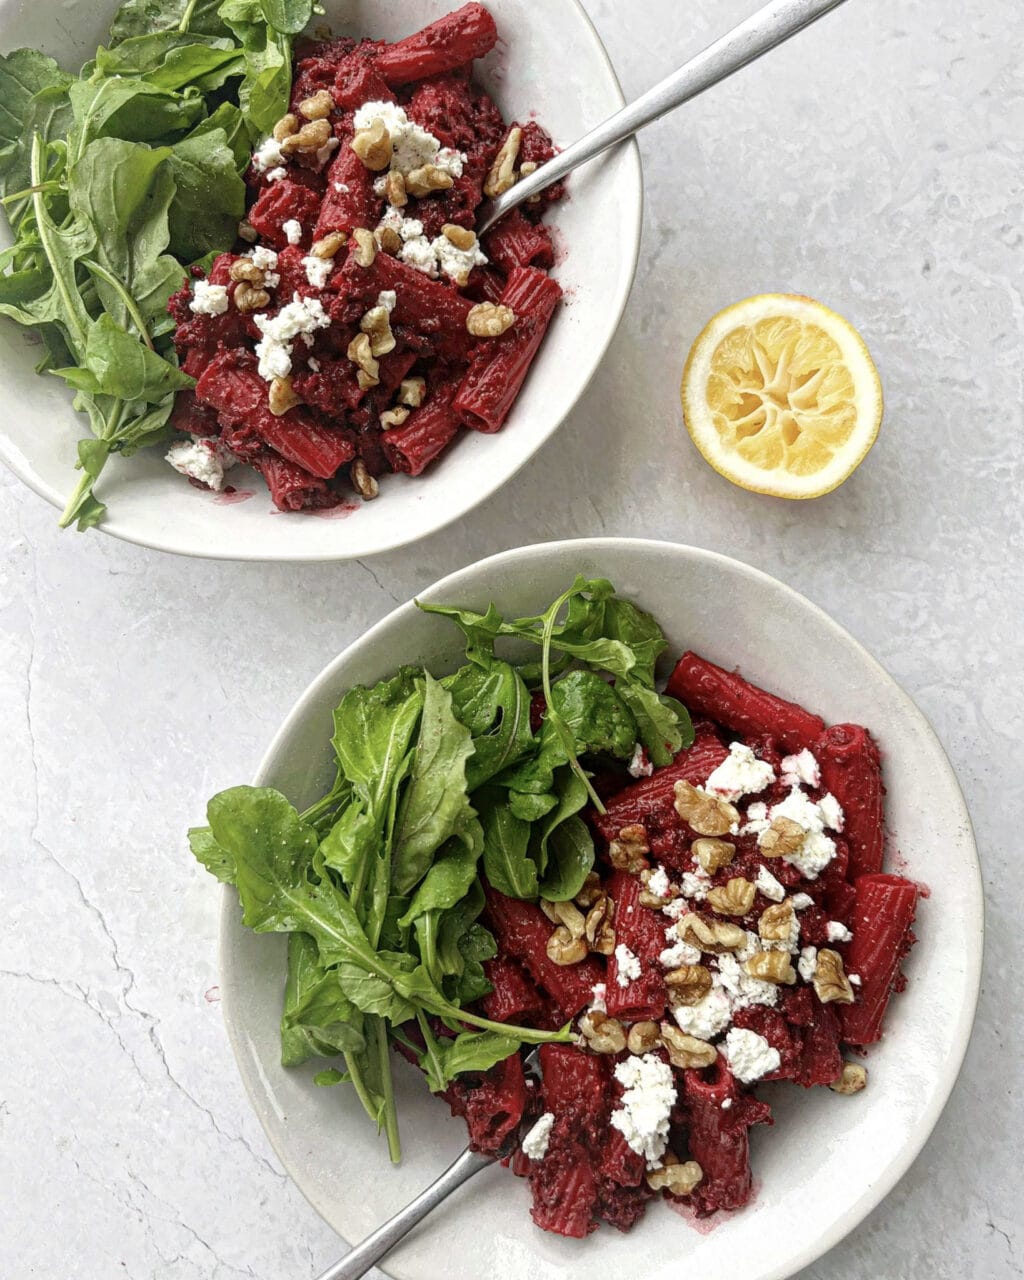 Two bowls of beetroot goat cheese pasta topped with goat cheese and chopped walnuts, with rocket on the side. A halved lemon is next to the plates.